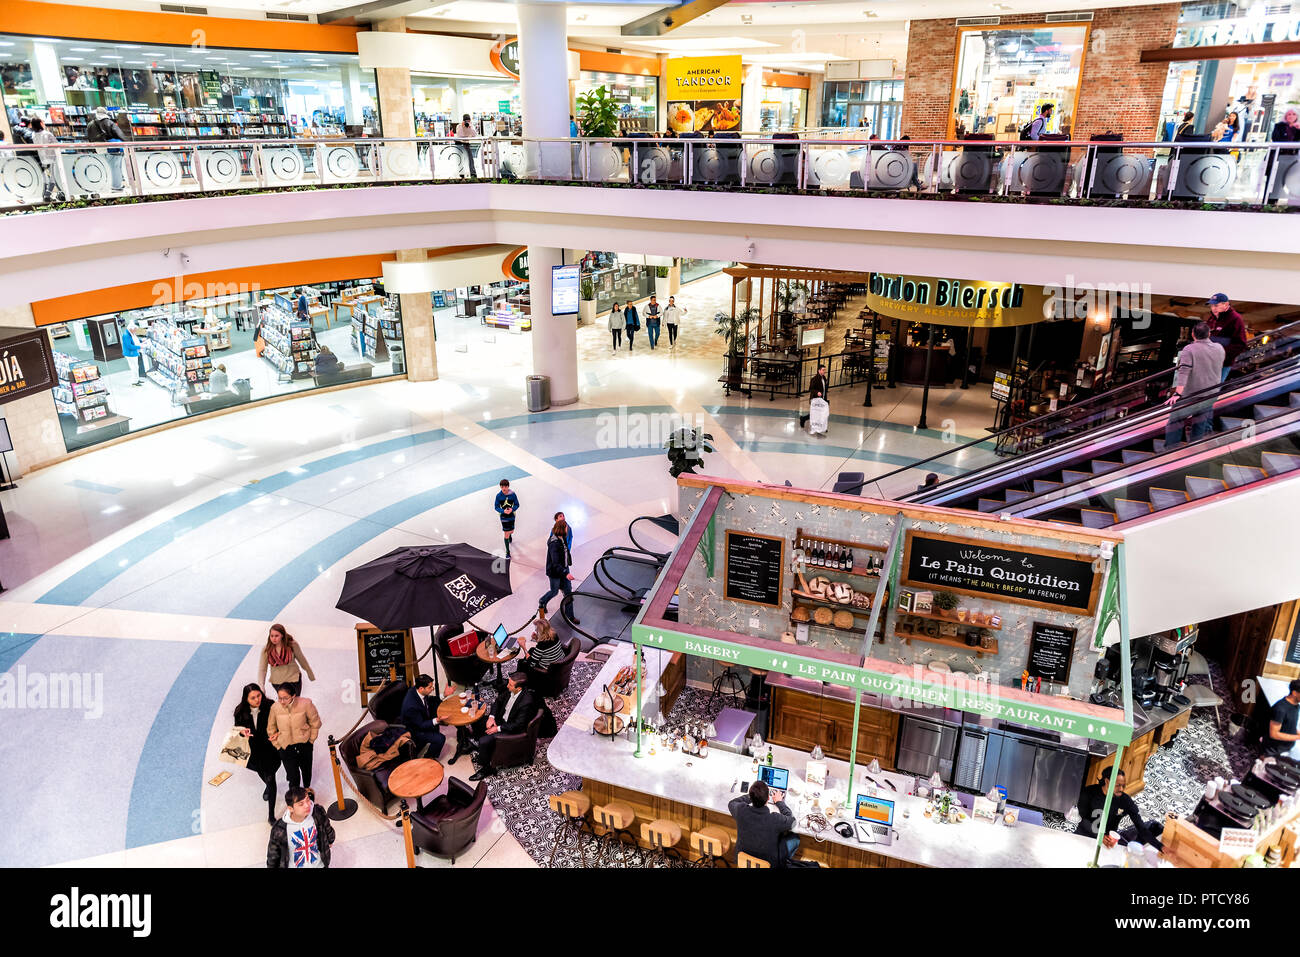 Tysons, USA - January 26, 2018: High angle view on food court with many stores, shops in Tyson's corner shopping mall with people walking, eating, buy Stock Photo